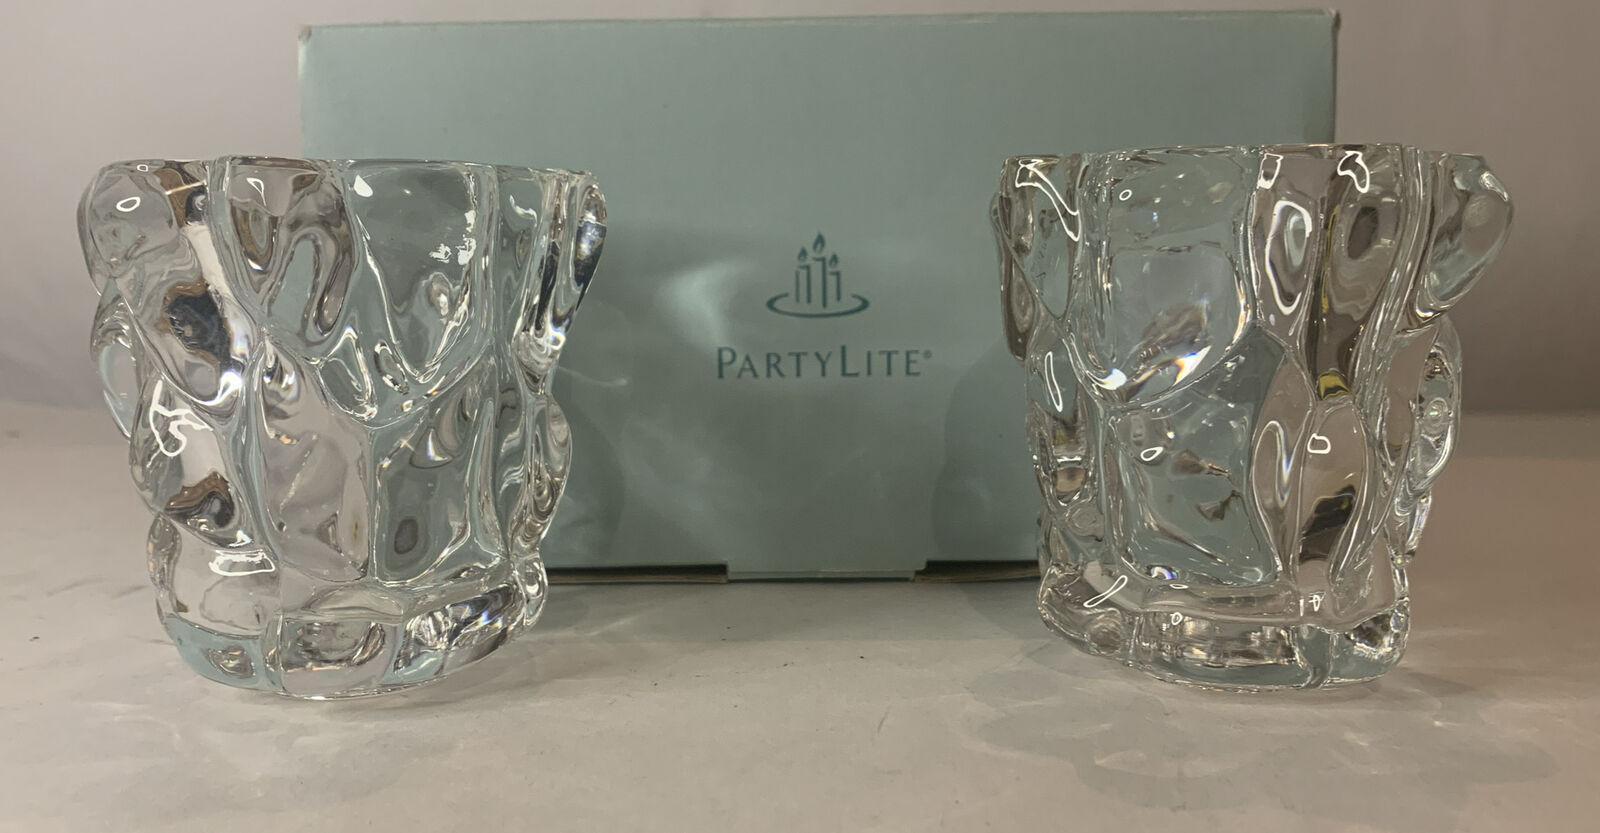 Partylite Clear Glacier Votive Holders Set Of 2 P0279 Brand New In Box